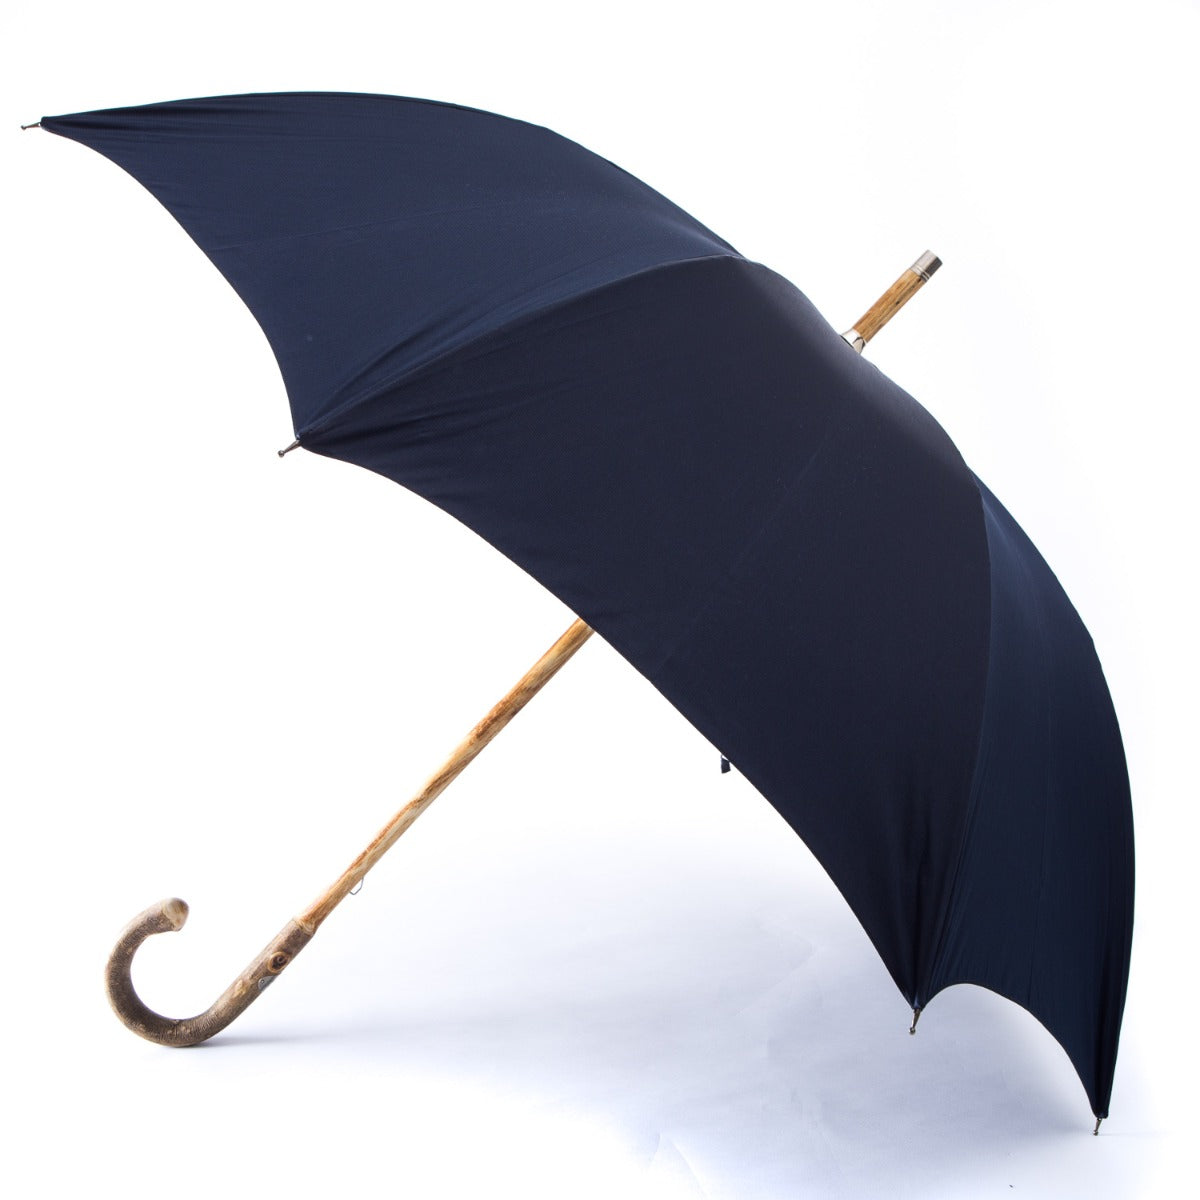 A gentleman's umbrella with a Ashwood Solid Stick Umbrella with Navy Canopy handle, sold by KirbyAllison.com.